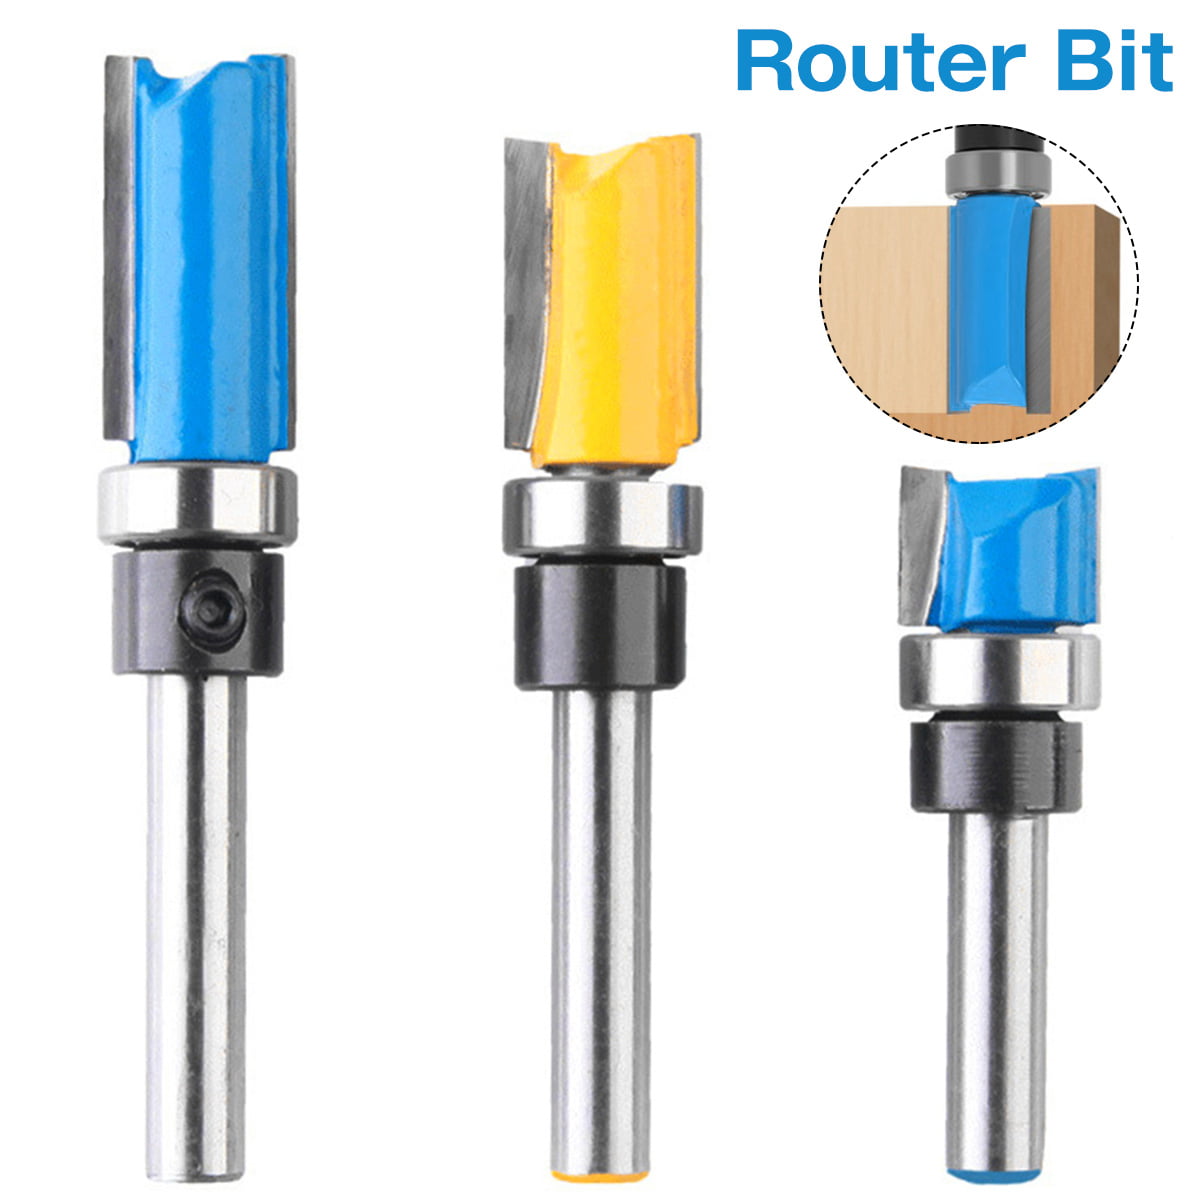 New Alloy Woodworking Cutter Kit Router Bits 1/4" Shank Sealed Bearing Bit Set 